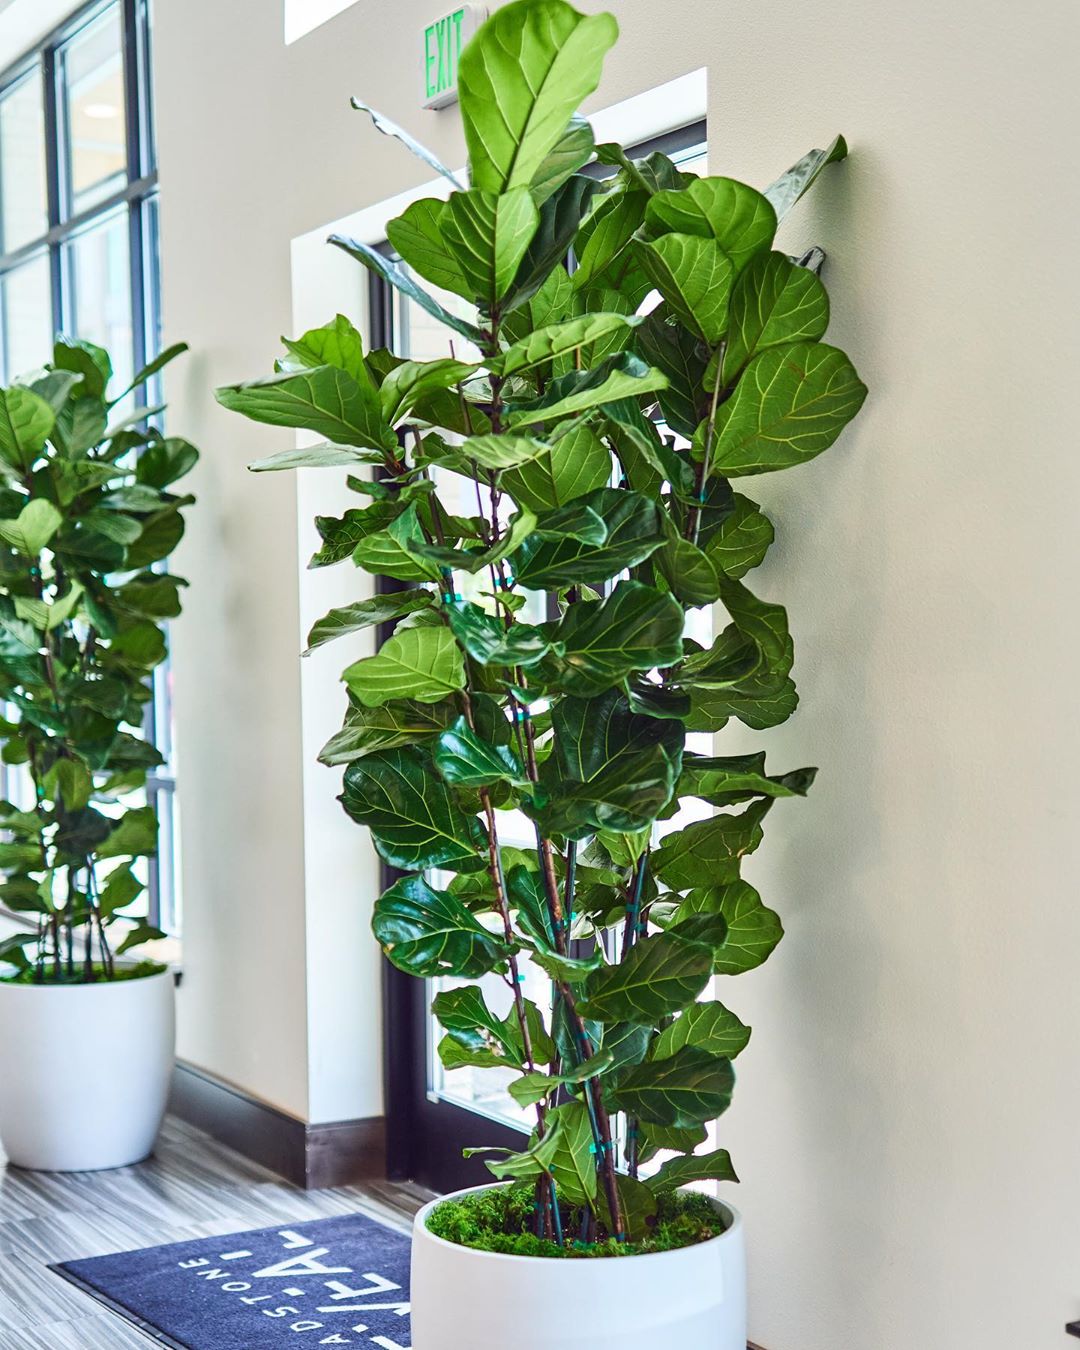 Personalized Fiddle Leaf Fig Care: Water, Light, Nutrients | Greg App